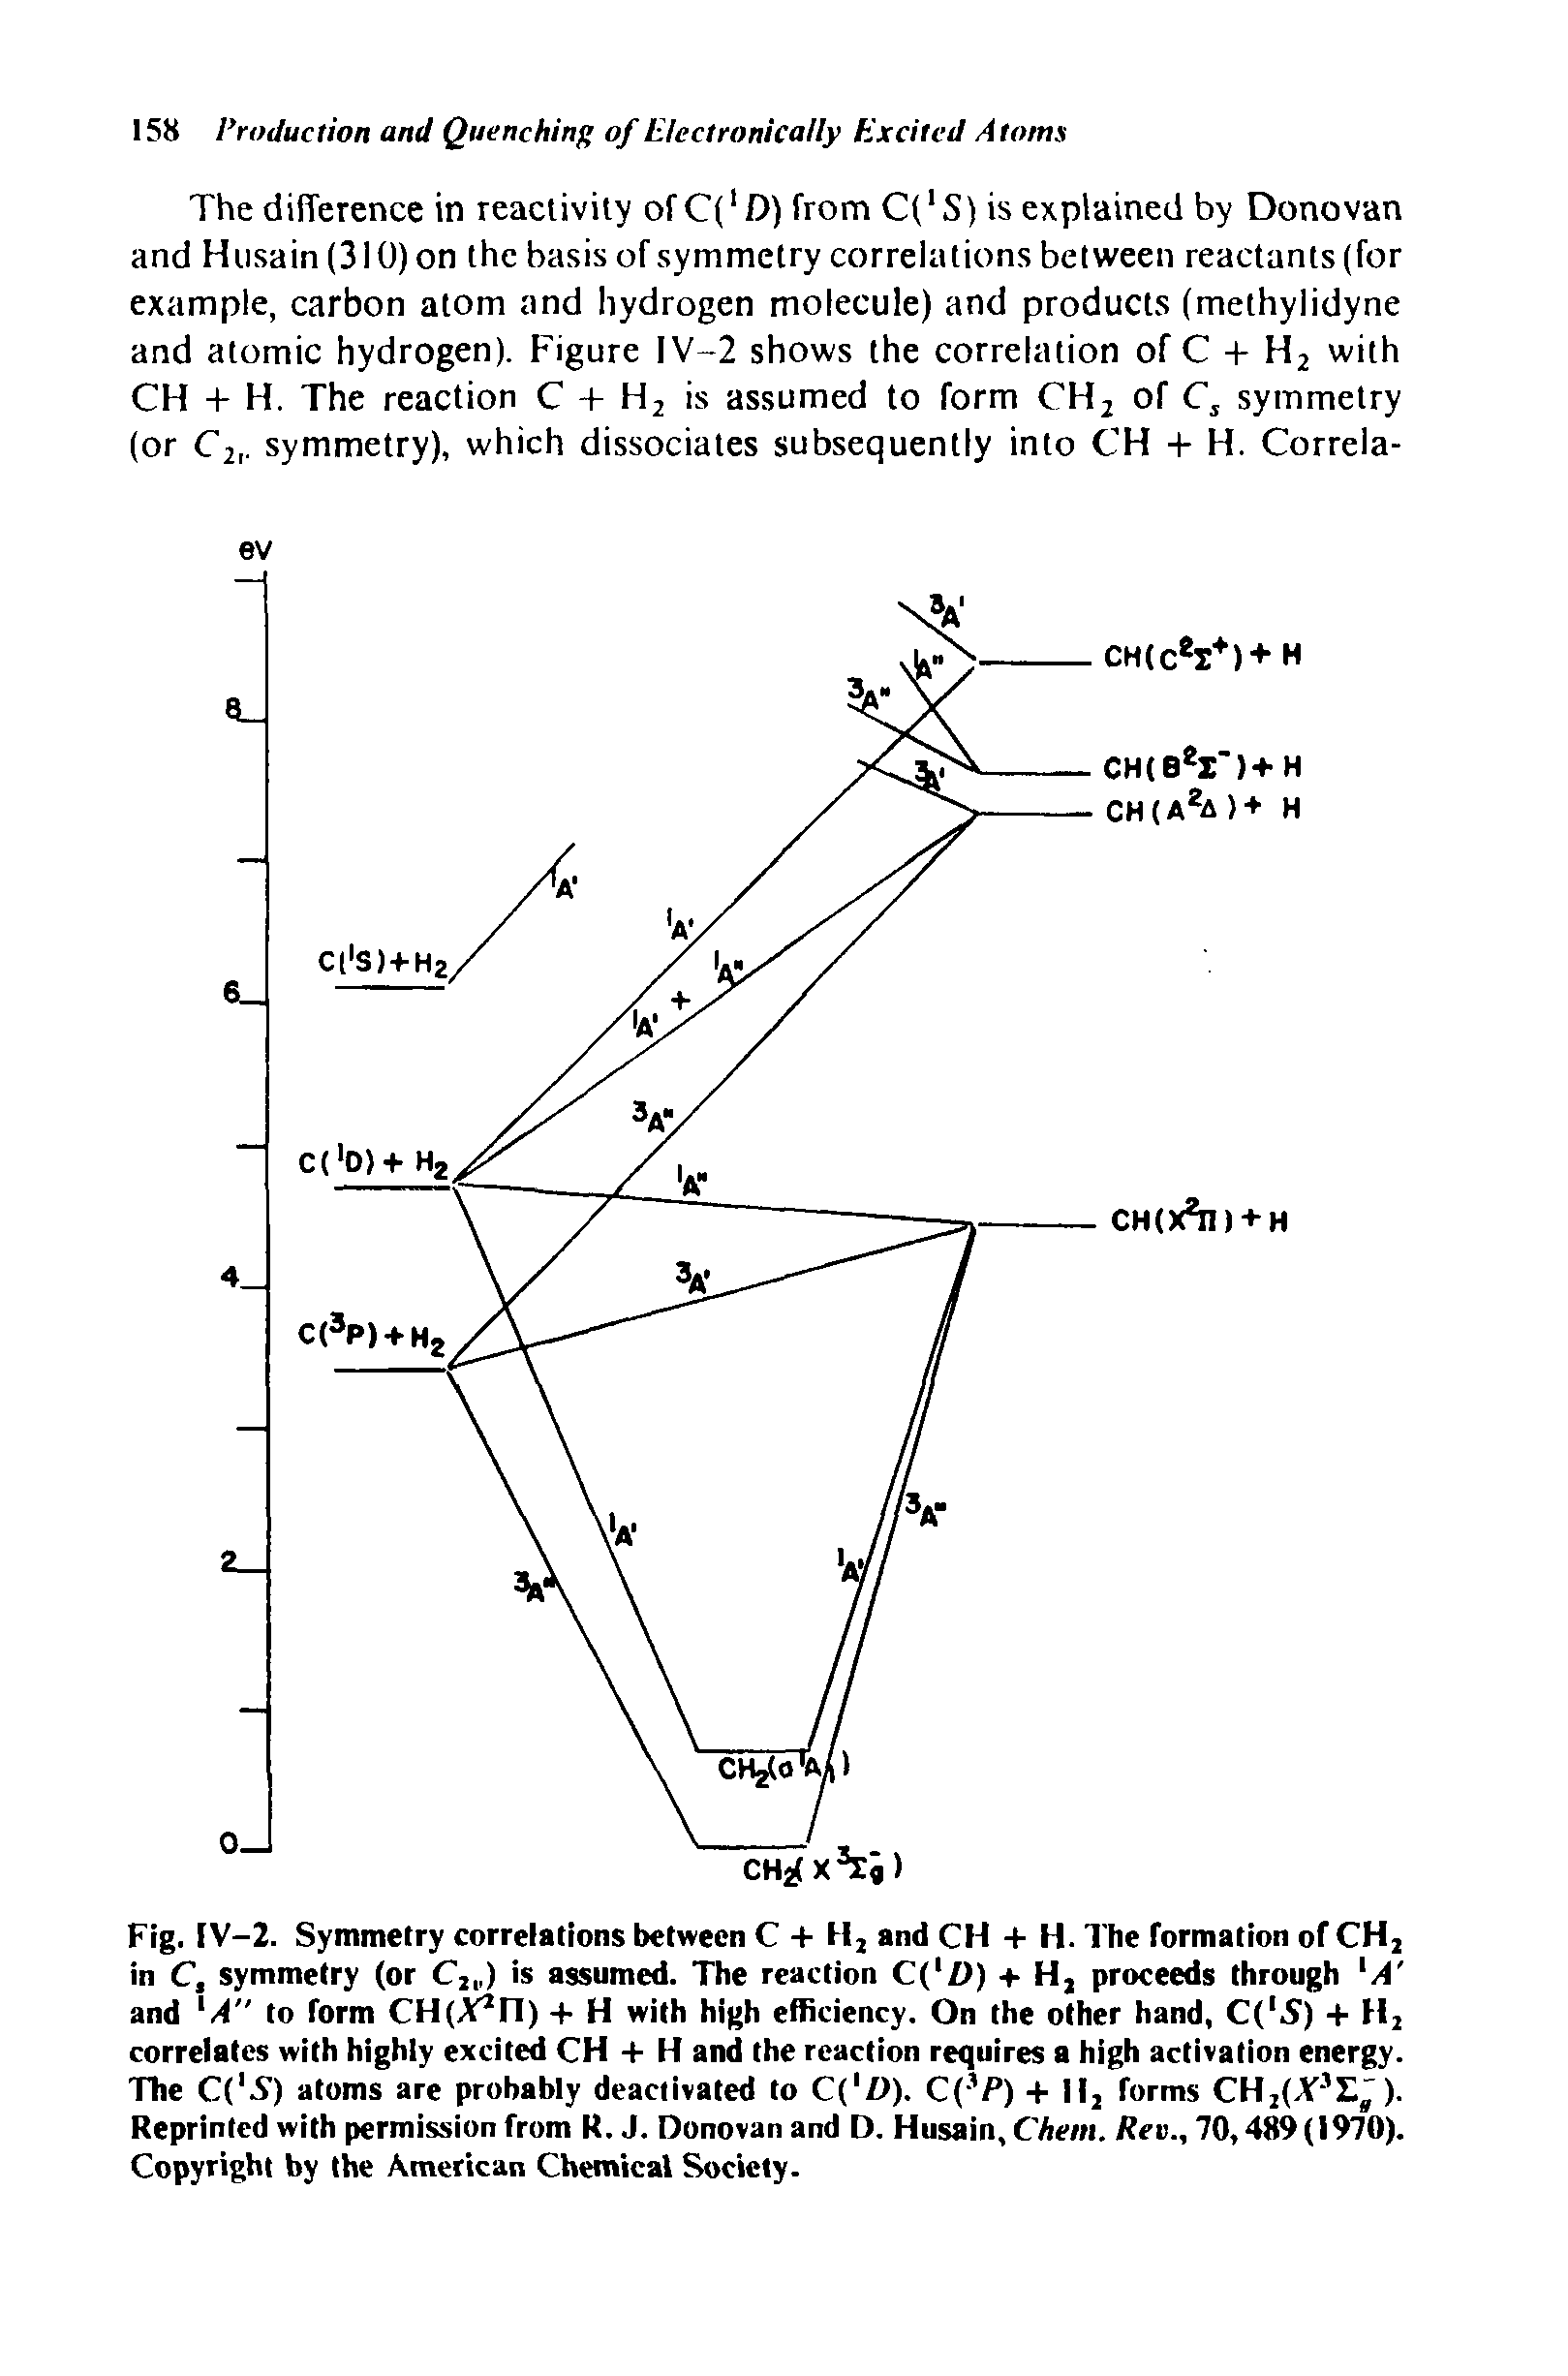 Fig. [V-2. Symmetry correlations between C + H2 and CH + H. The formation of CH2 in C, symmetry (or C2. ) is assumed. The reaction C( D) + H2 proceeds through A and A" to form CHfX1 ) + H with high efficiency. On the other hand, C( S) + H2 correlates with highly excited CH + H and the reaction requires a high activation energy. The C(. S) atoms are probably deactivated to C(1 Z>). C(3P) + Il2 forms CH2(.V- ). Reprinted with permission from R. J. Donovan and D. Husain, Chern. Rev., 70,489(1970). Copyright by the American Chemical Society.